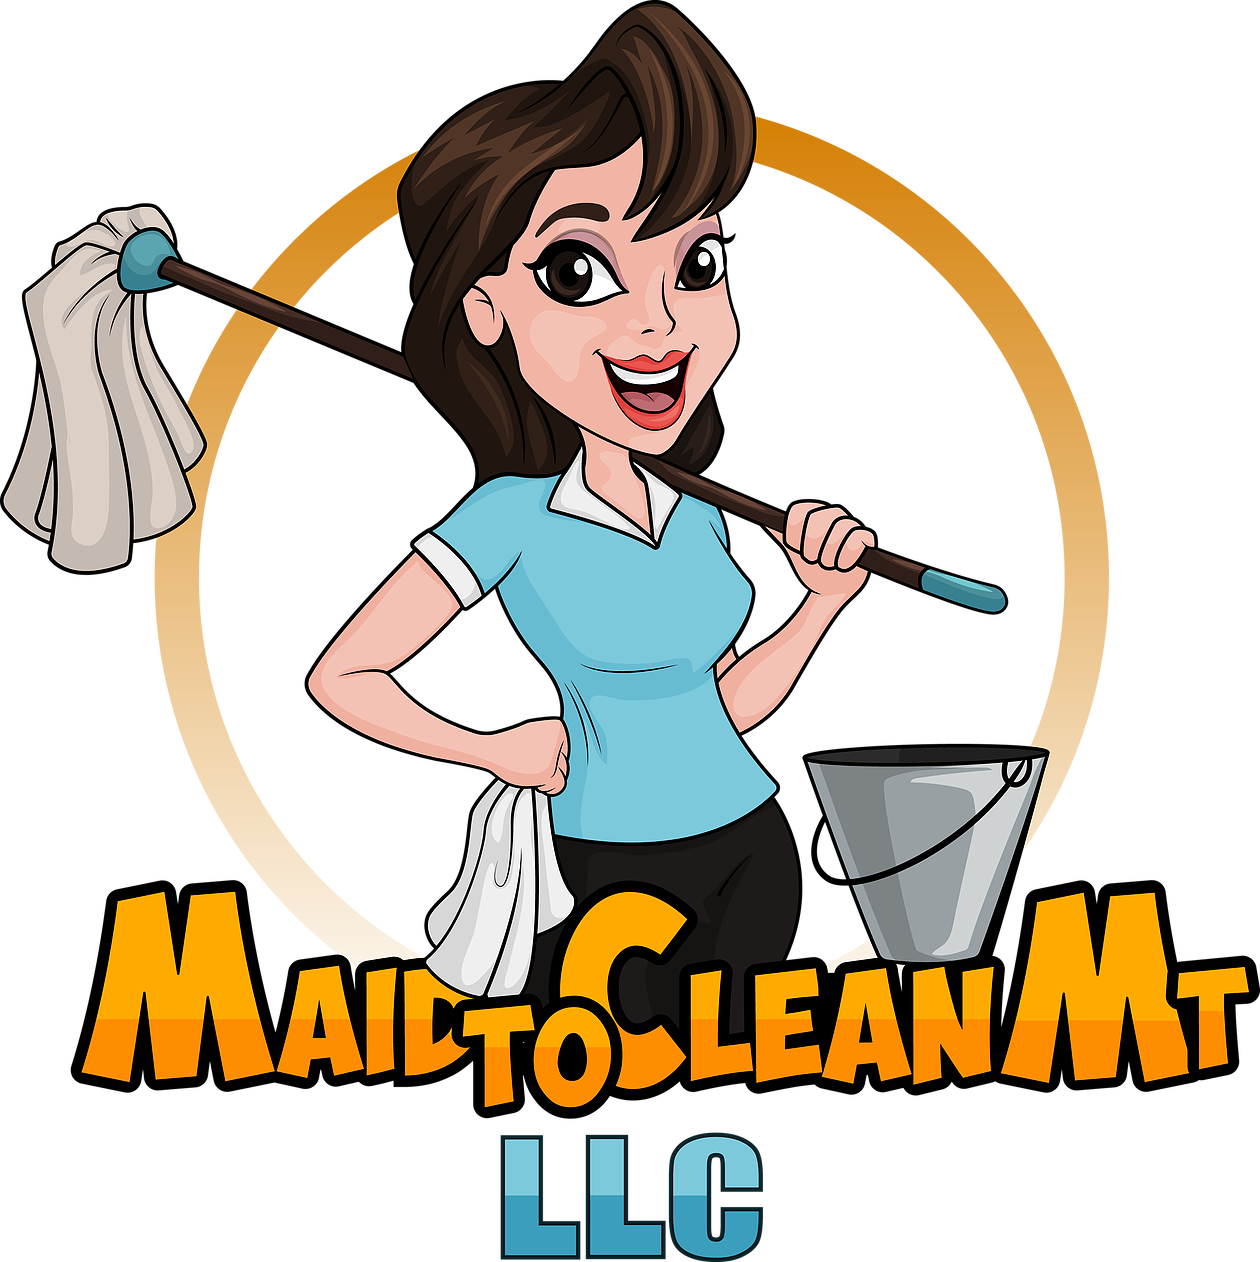 laundry clipart cleaning house